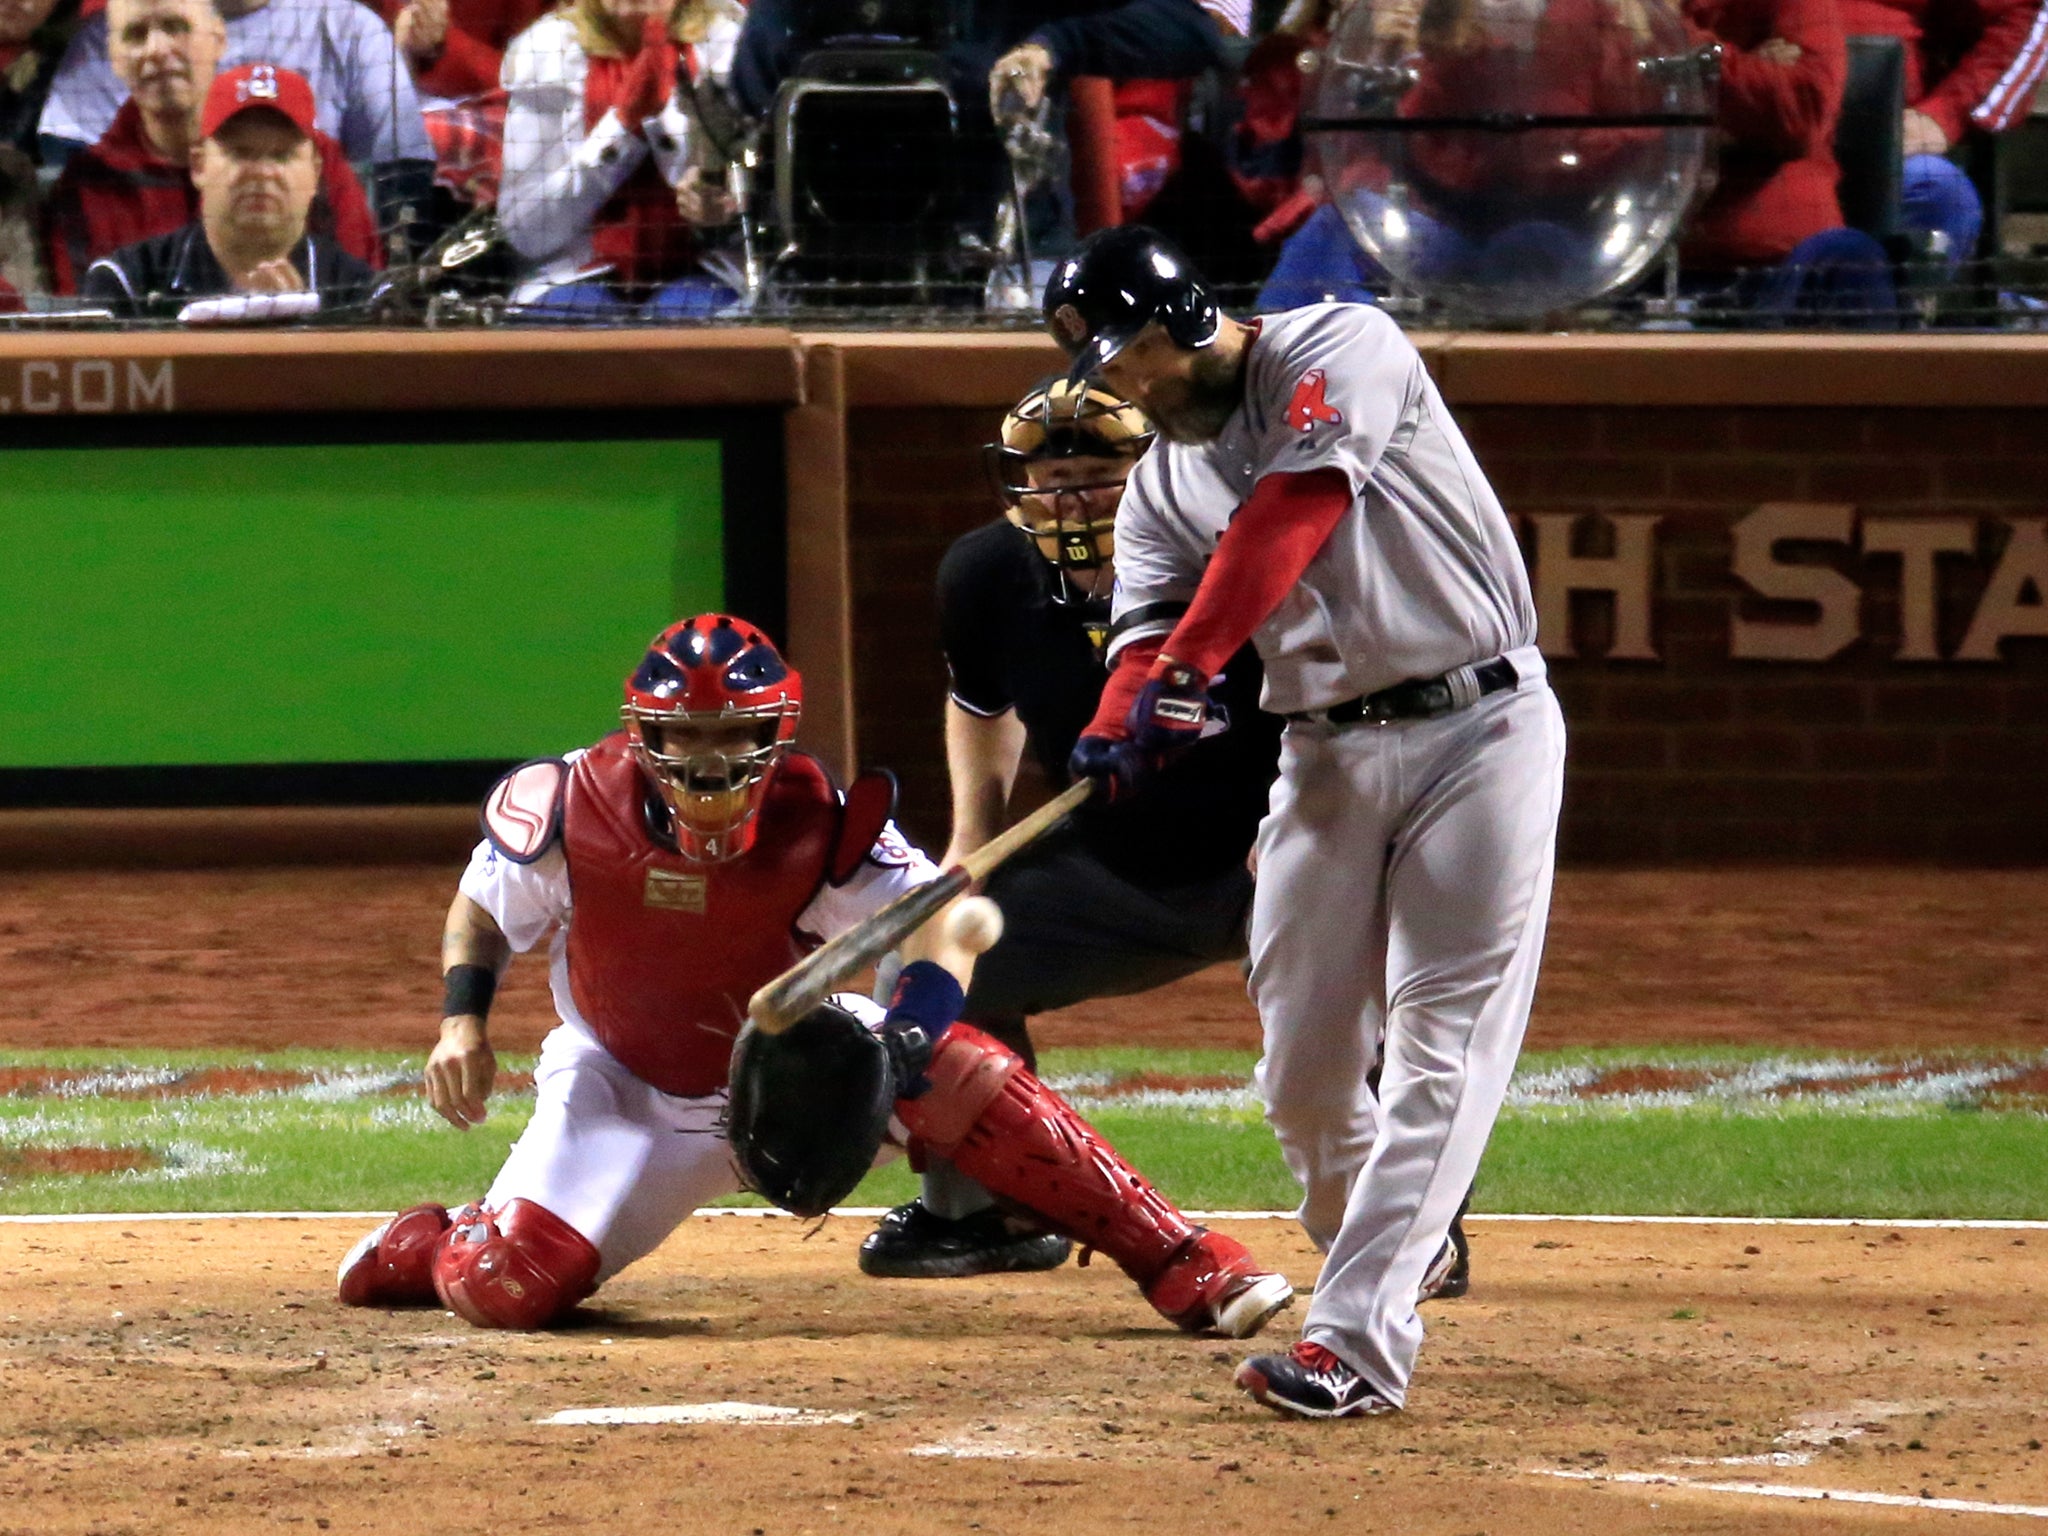 Boston Red Sox took a 3-2 lead in baseball's World Series